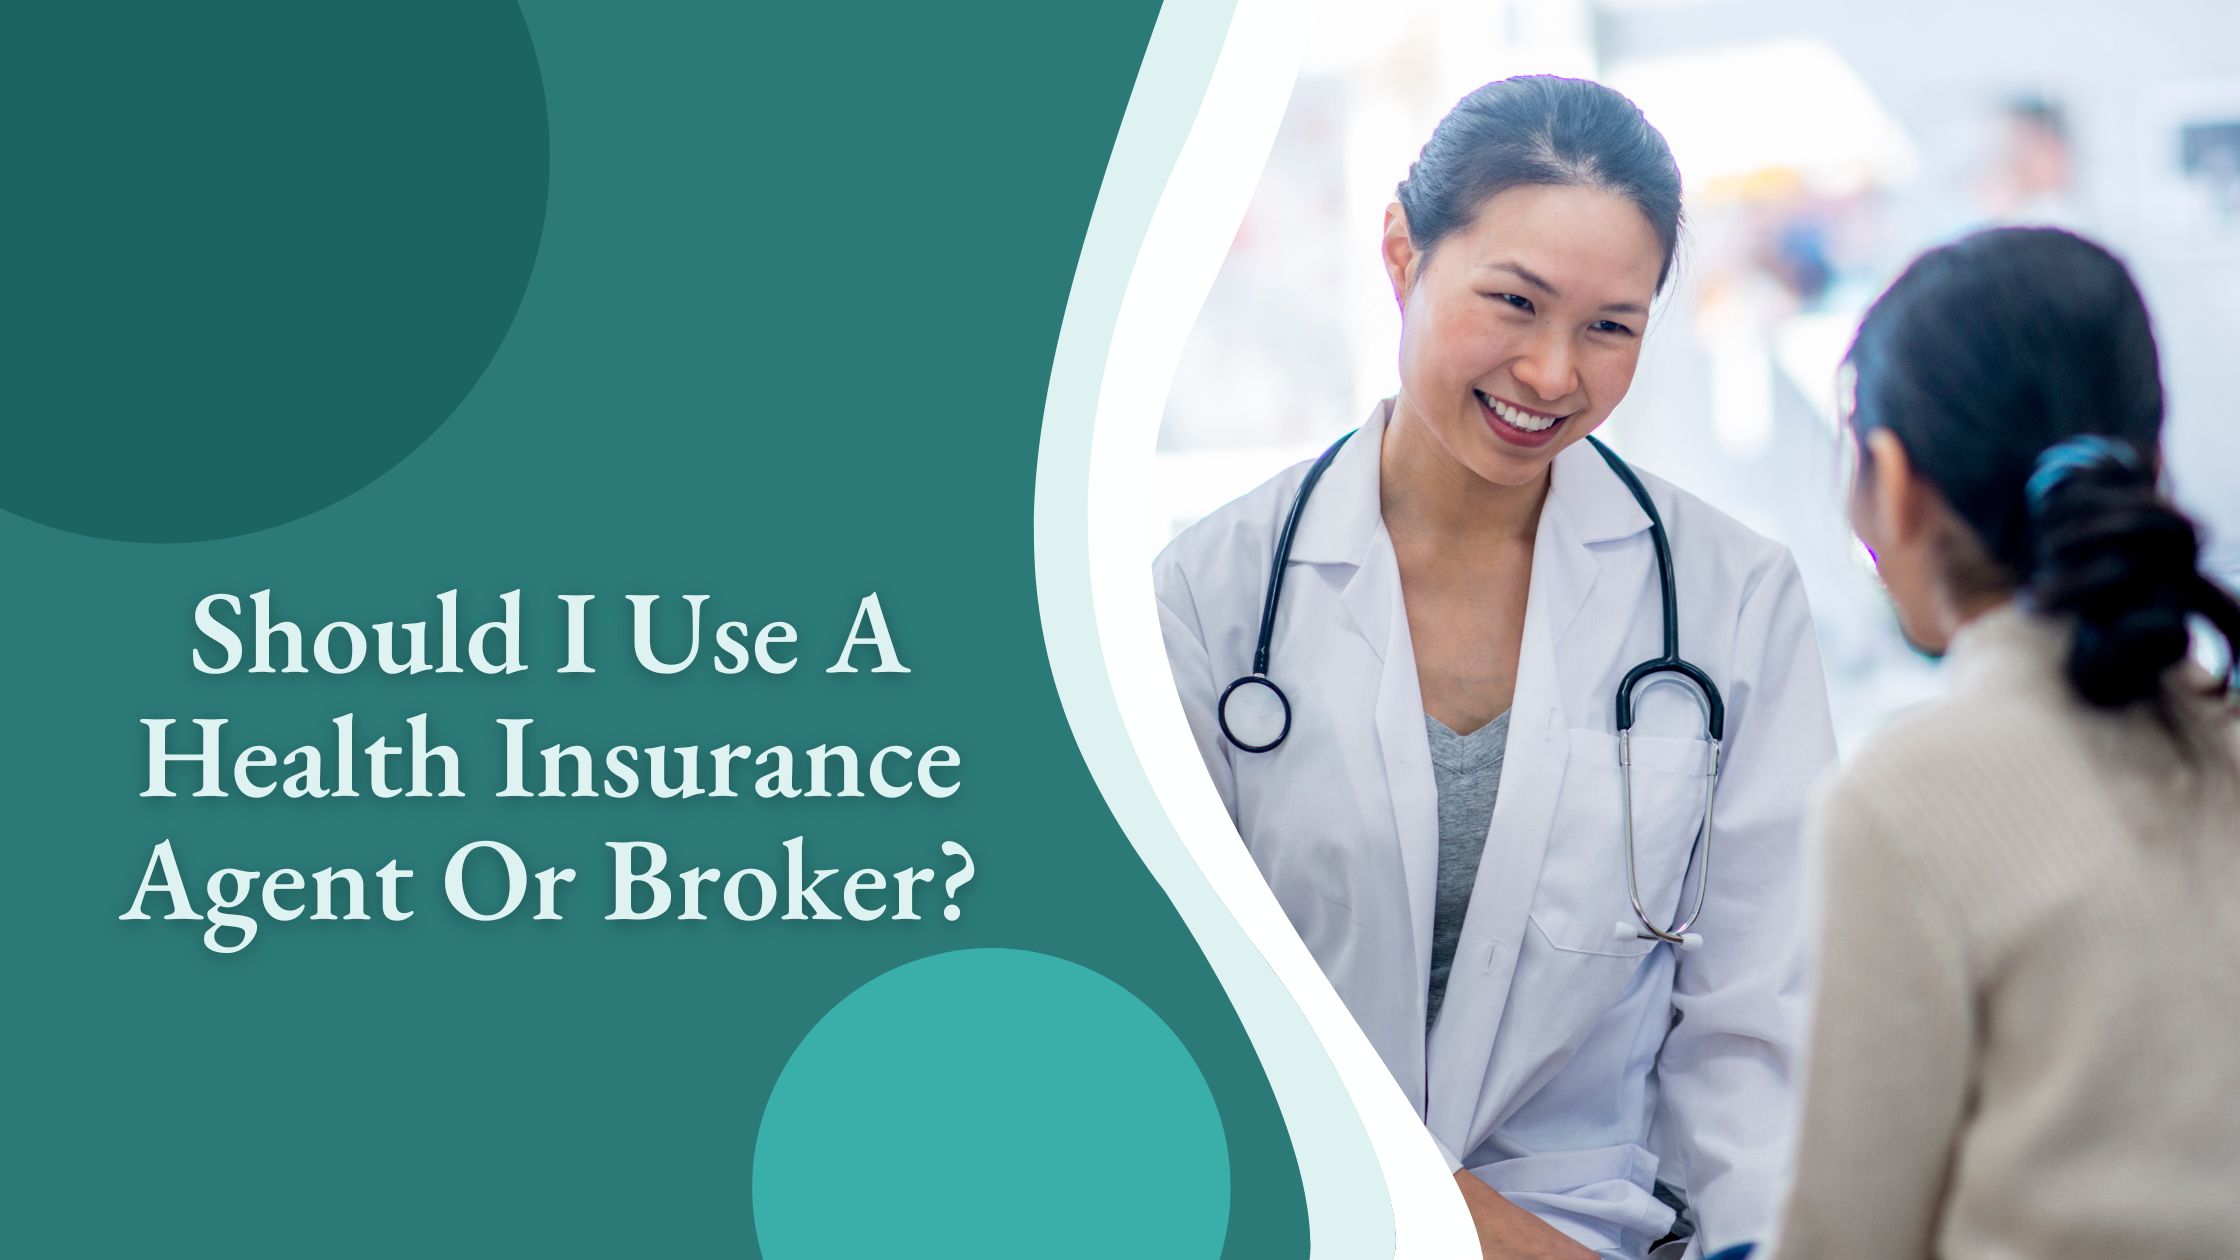 Should I Use A Health Insurance Agent Or Broker